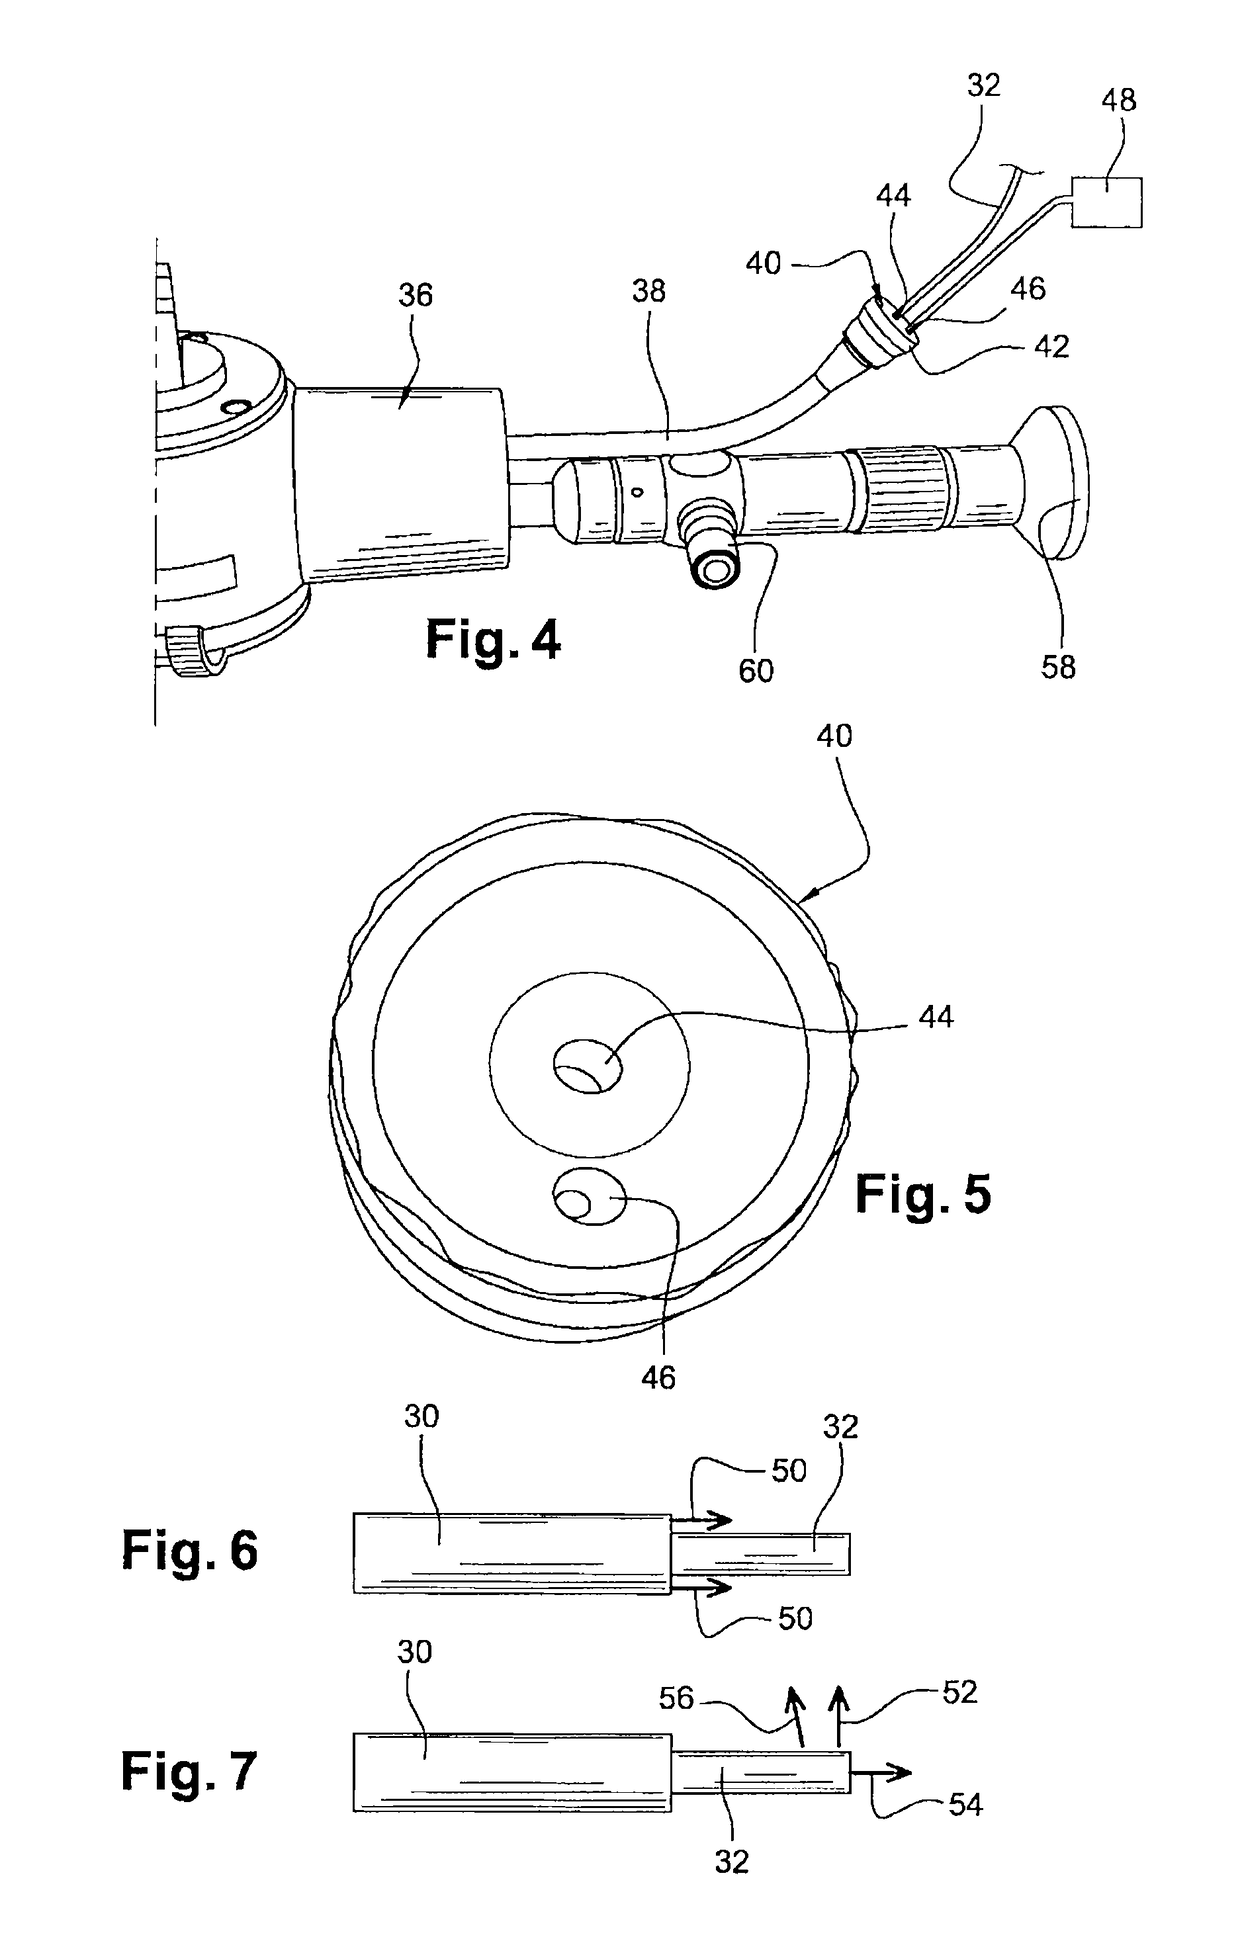 Device for searching for defects on parts by endoscopy